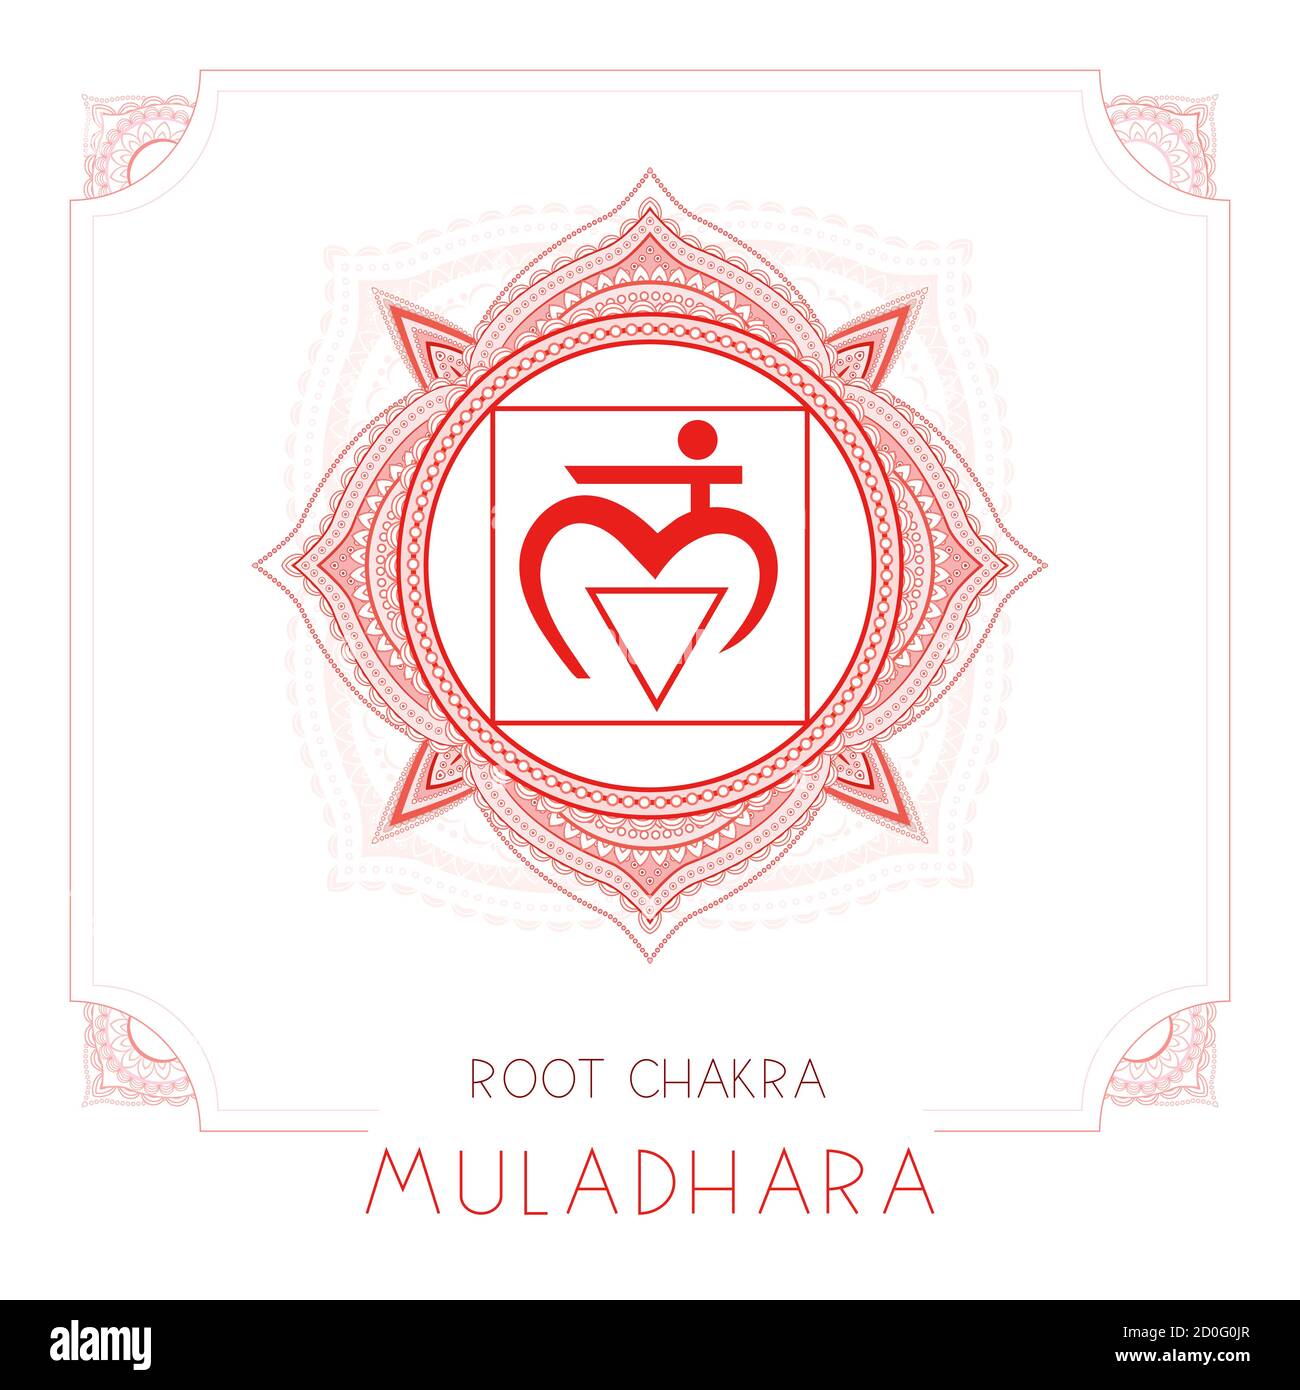 Vector illustration with symbol Muladhara - Root chakra and decorative frame on white background. Round mandala pattern and hand drawn lettering. Colo Stock Vector